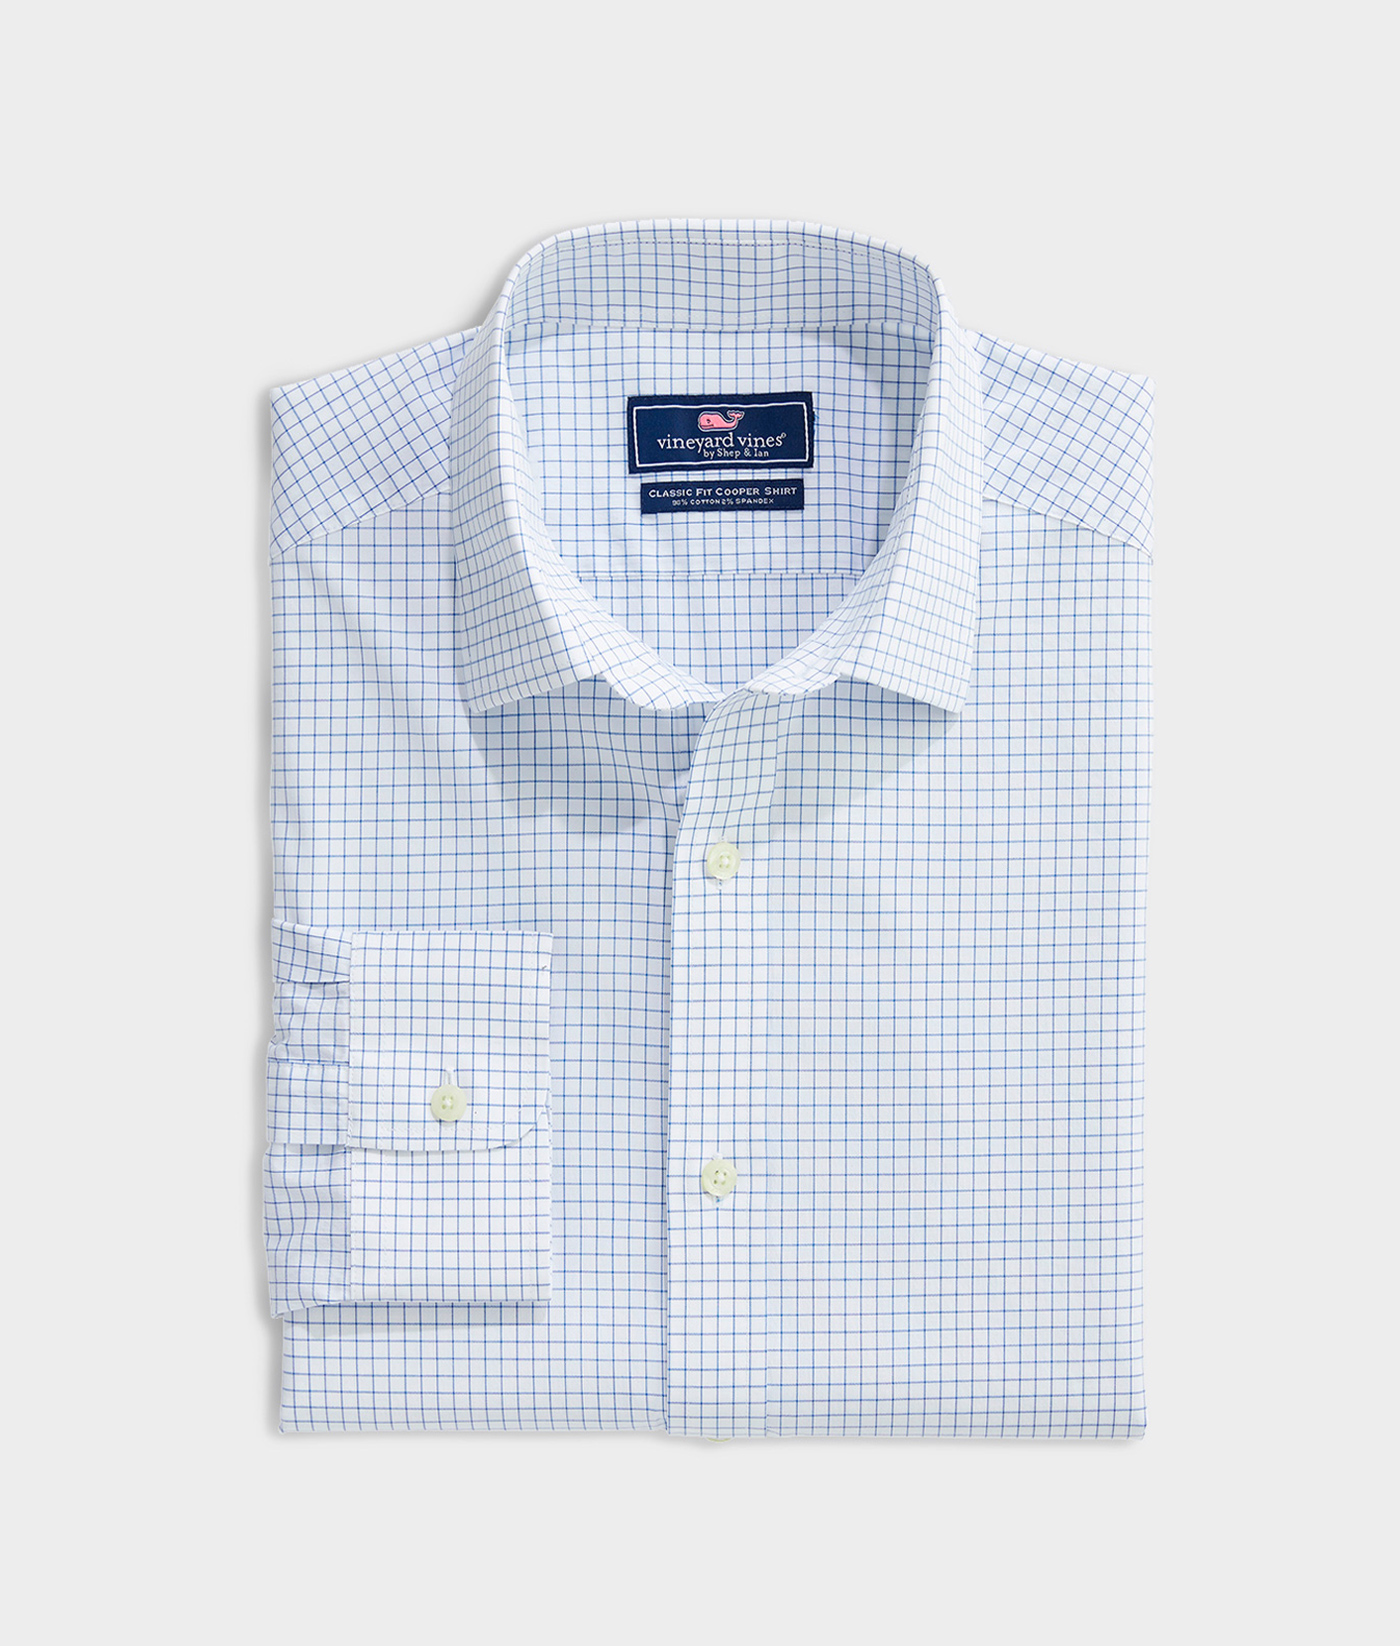 Shop Classic Fit Check Shirt in Stretch Cotton at vineyard vines